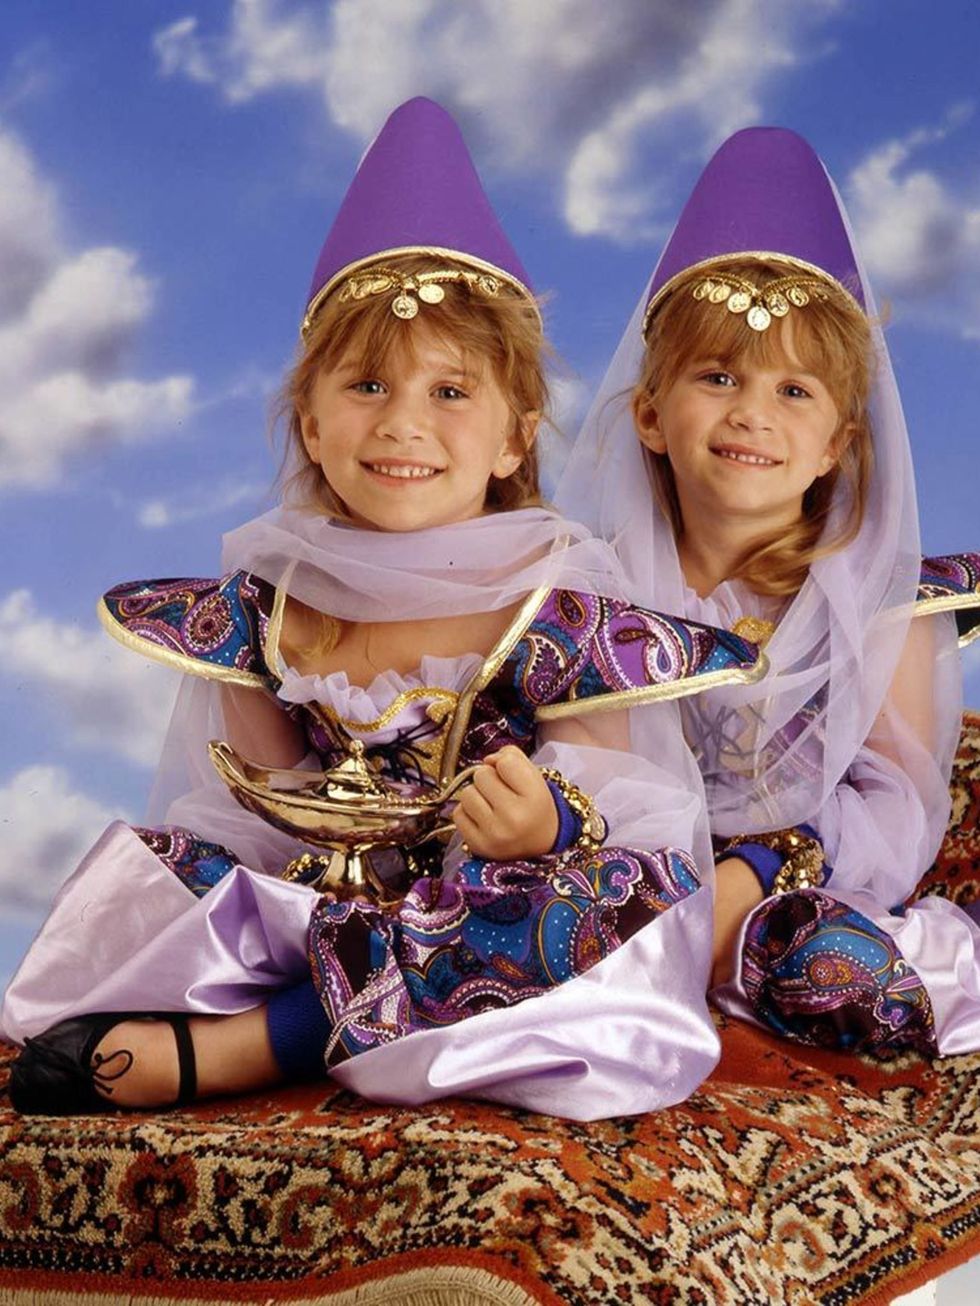 Mary-Kate and Ashley Olsen during the 90s